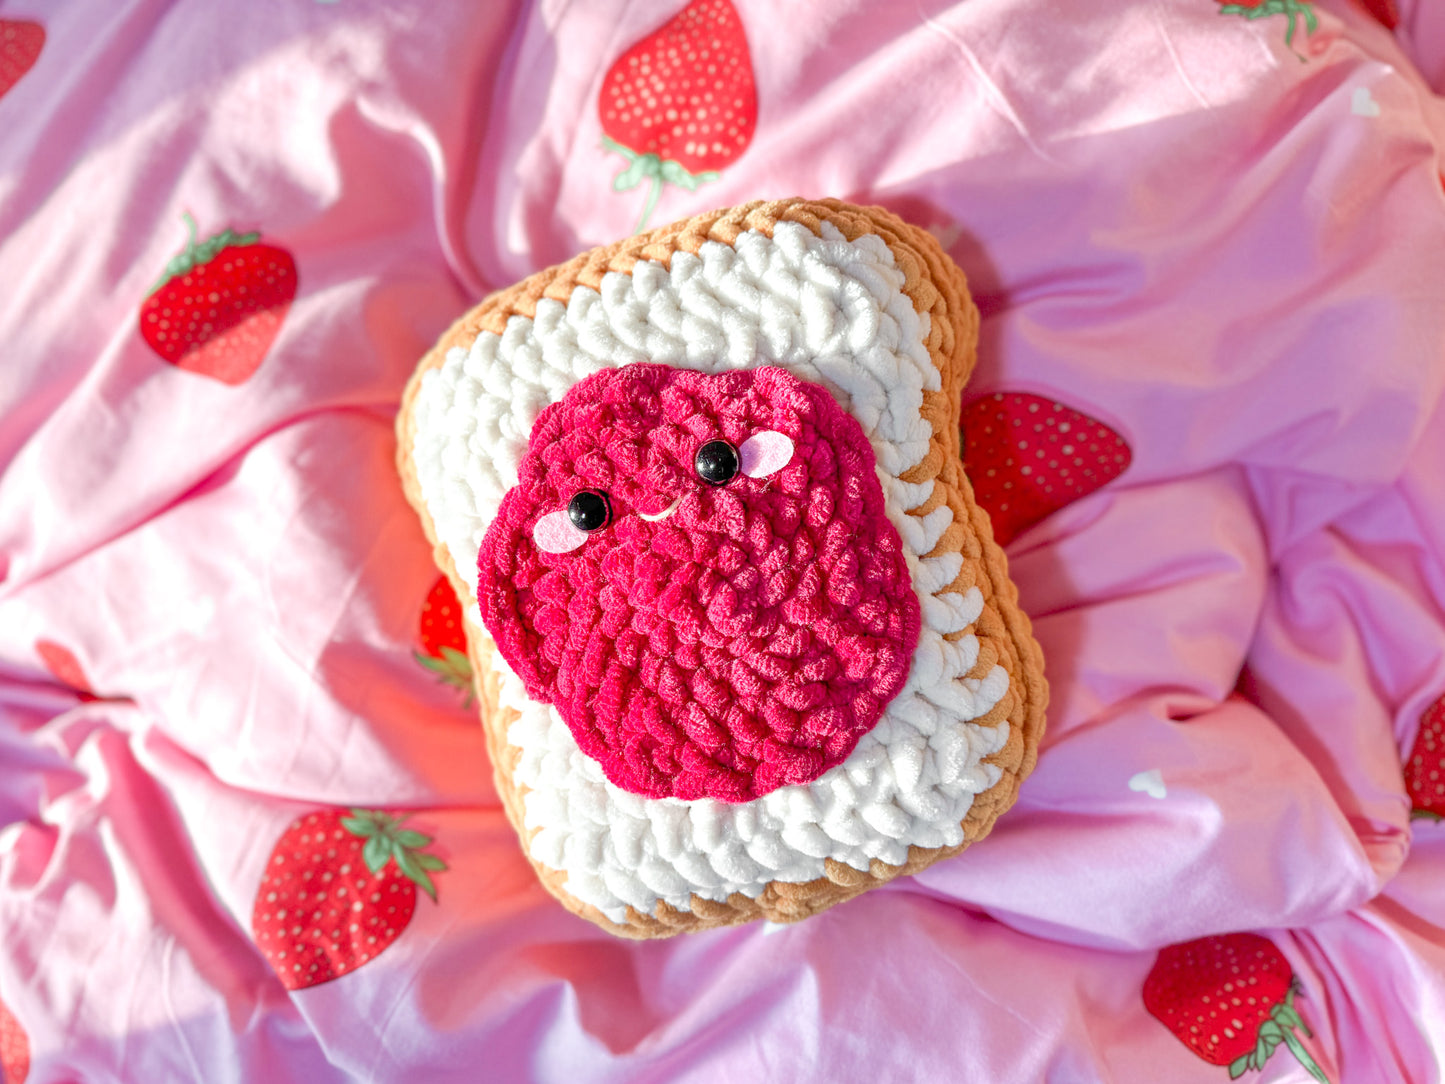 Peanut Butter and Jelly Crochet Pattern